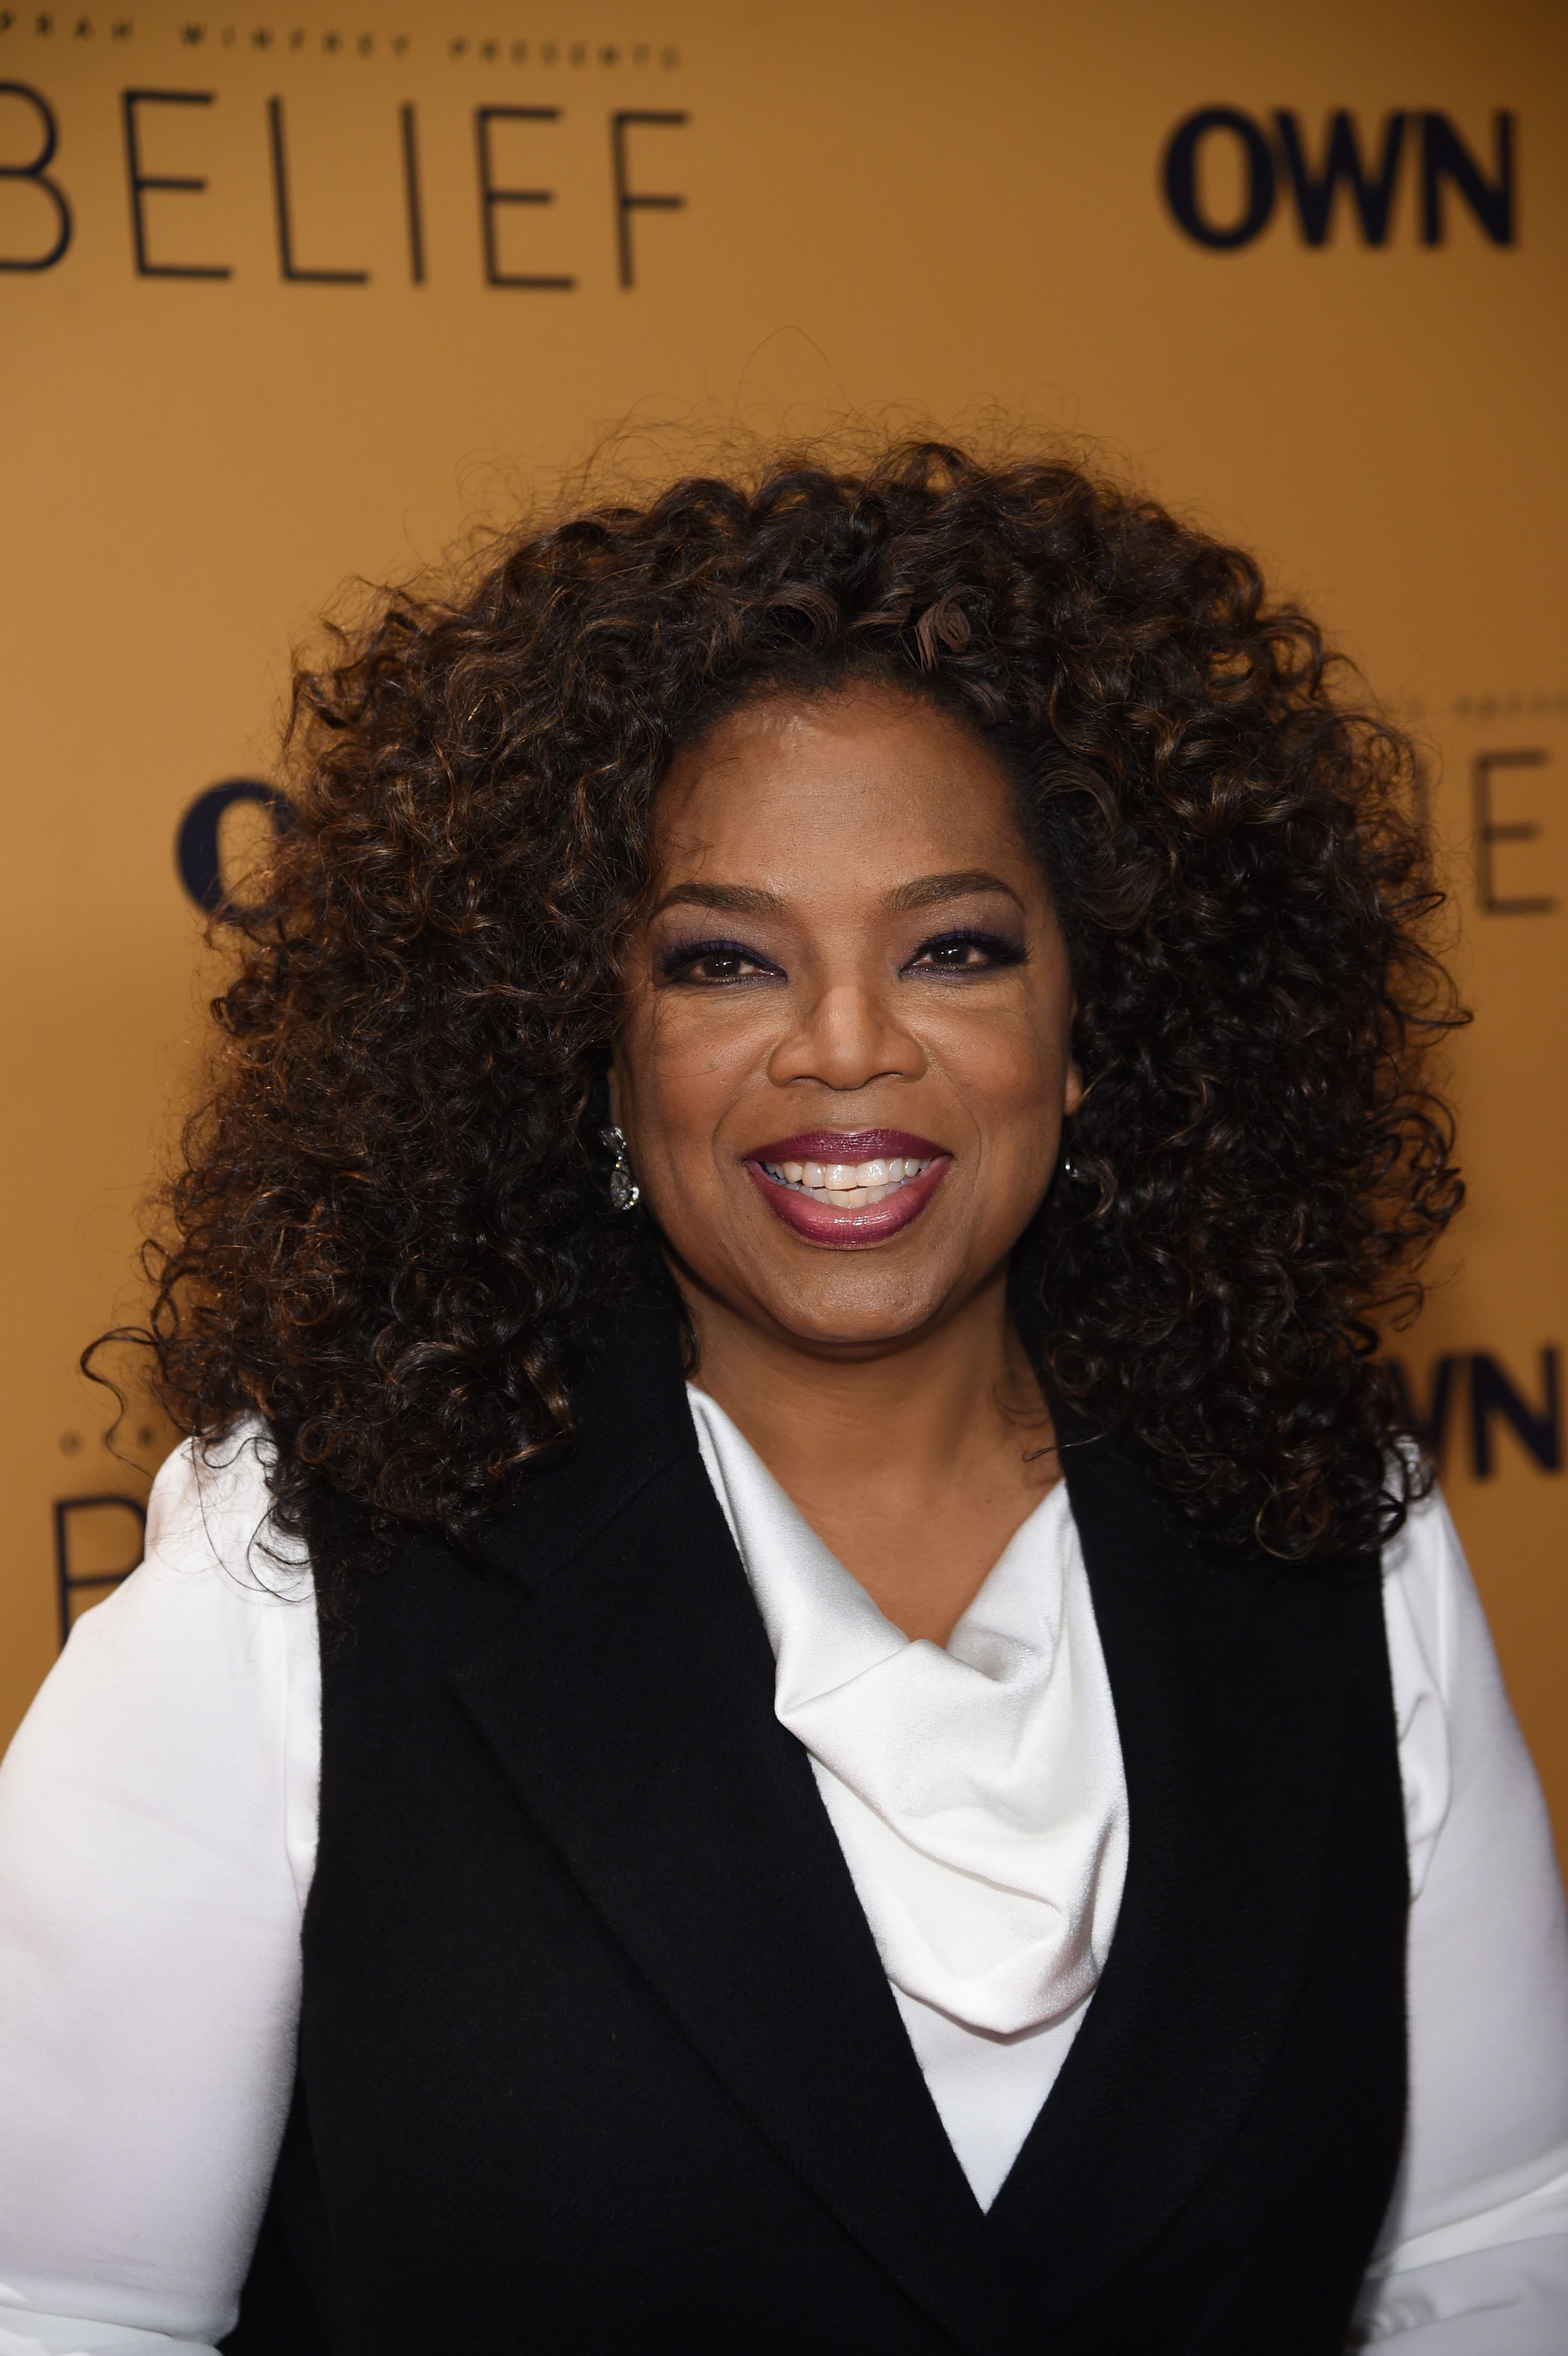 Oprah Winfrey at the "Belief" New York premiere on October 14, 2015 in New York City | Photo: Getty Images